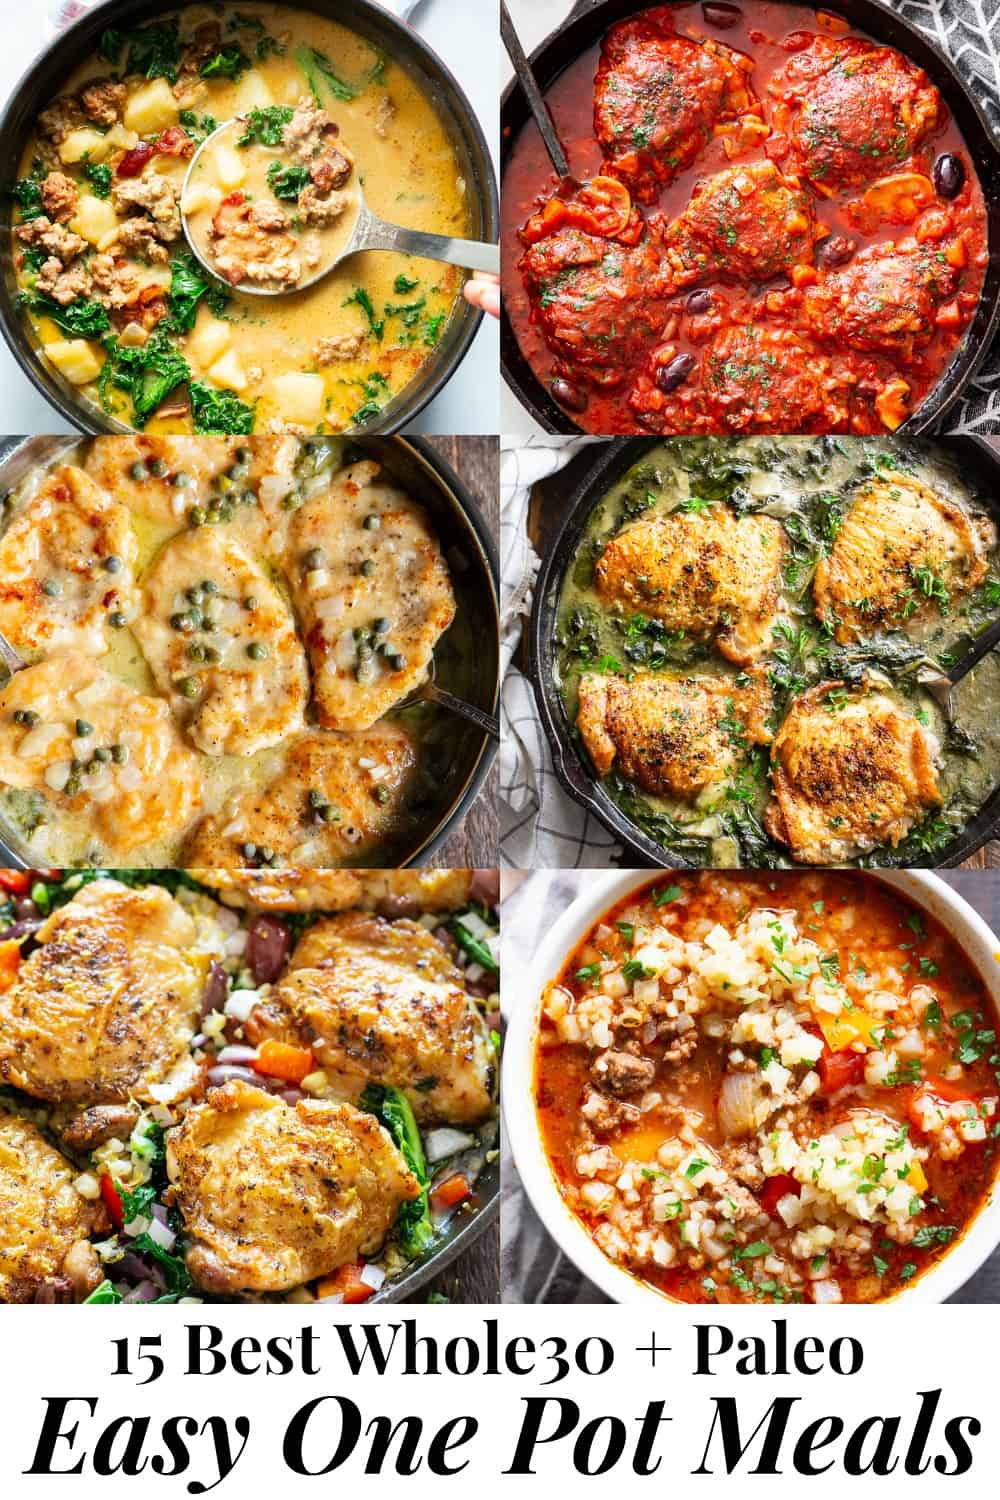 This recipe roundup includes 15 of the best one pot paleo meals featured on Paleo Running Momma!   All are easy and perfect for weekdays when time and energy is lacking.  These one pot meals are also Whole30 compliant and many are low carb and keto friendly.  From creamy tuscan chicken to instant pot chili, there's something to suit everyone's cravings! #paleo #Whole30 #cleaneating 